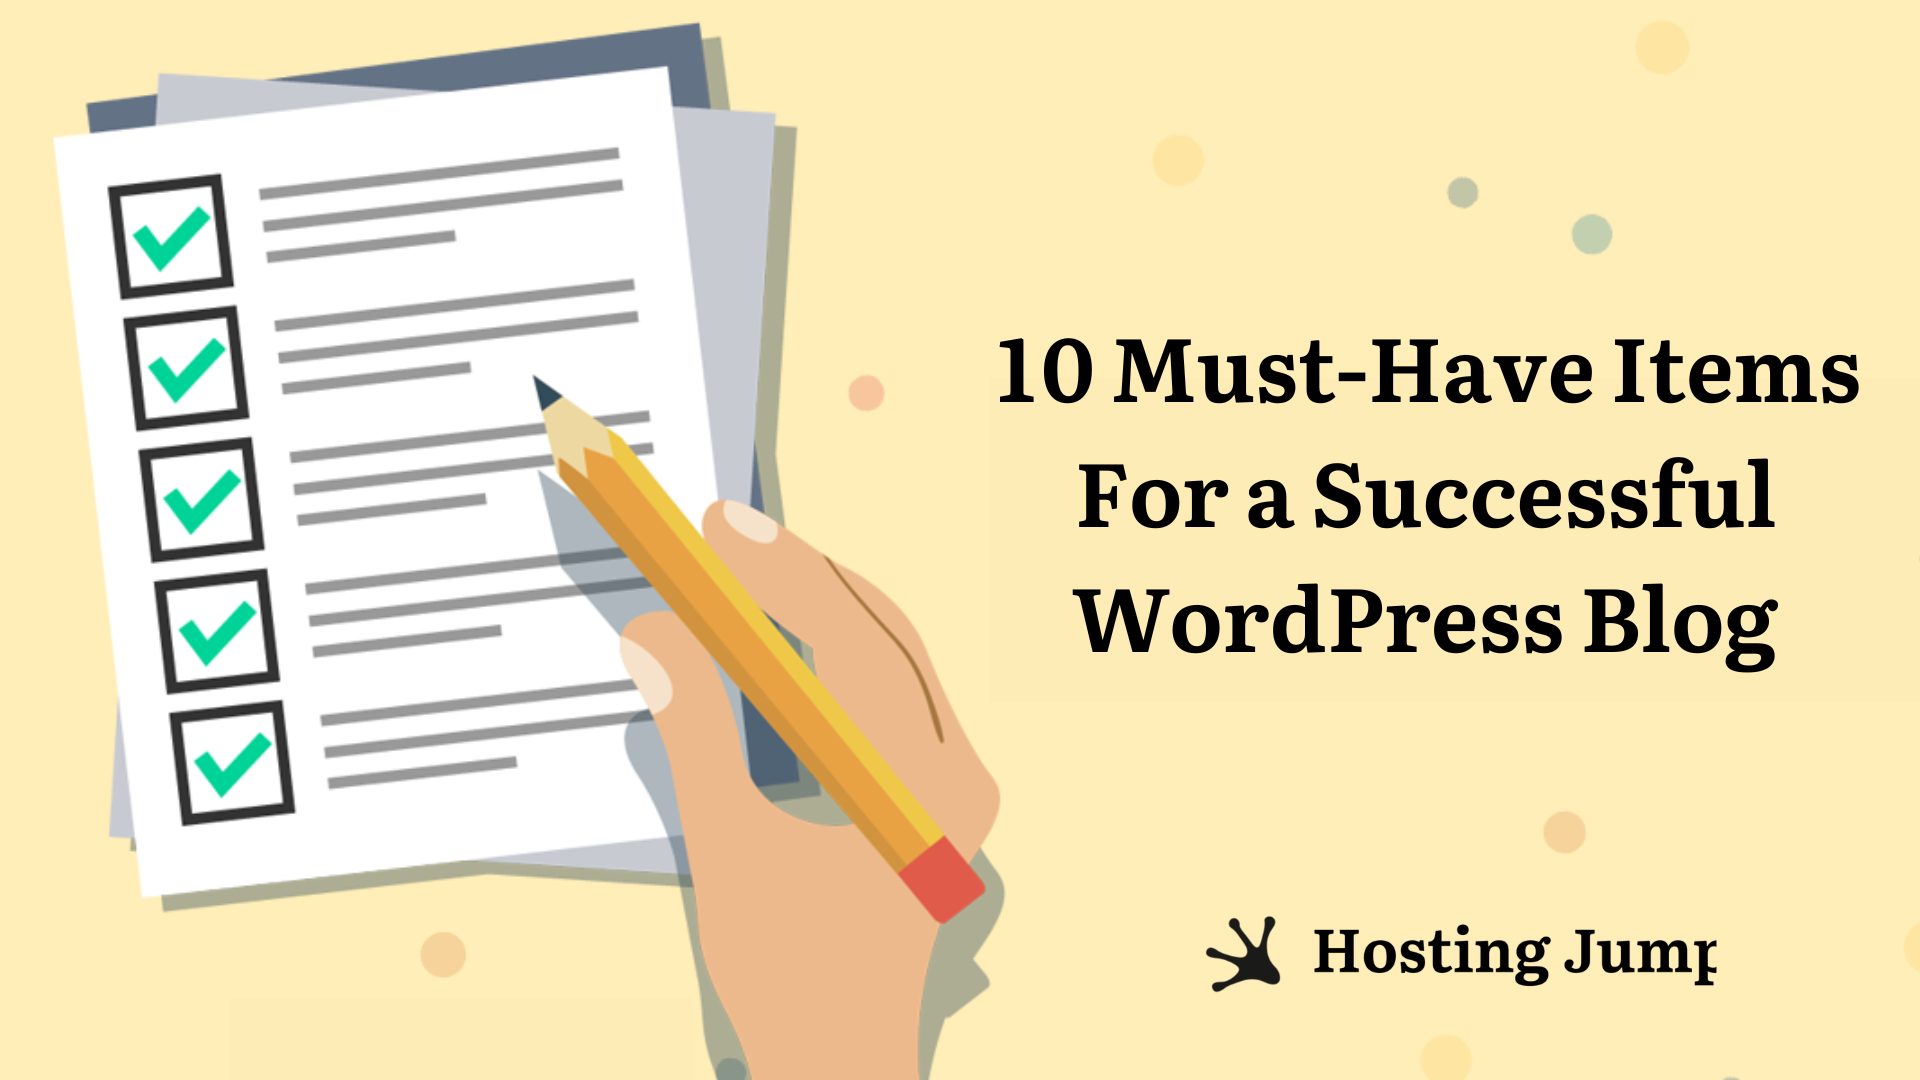 10 Must-Have Items for a Successful WordPress Blog